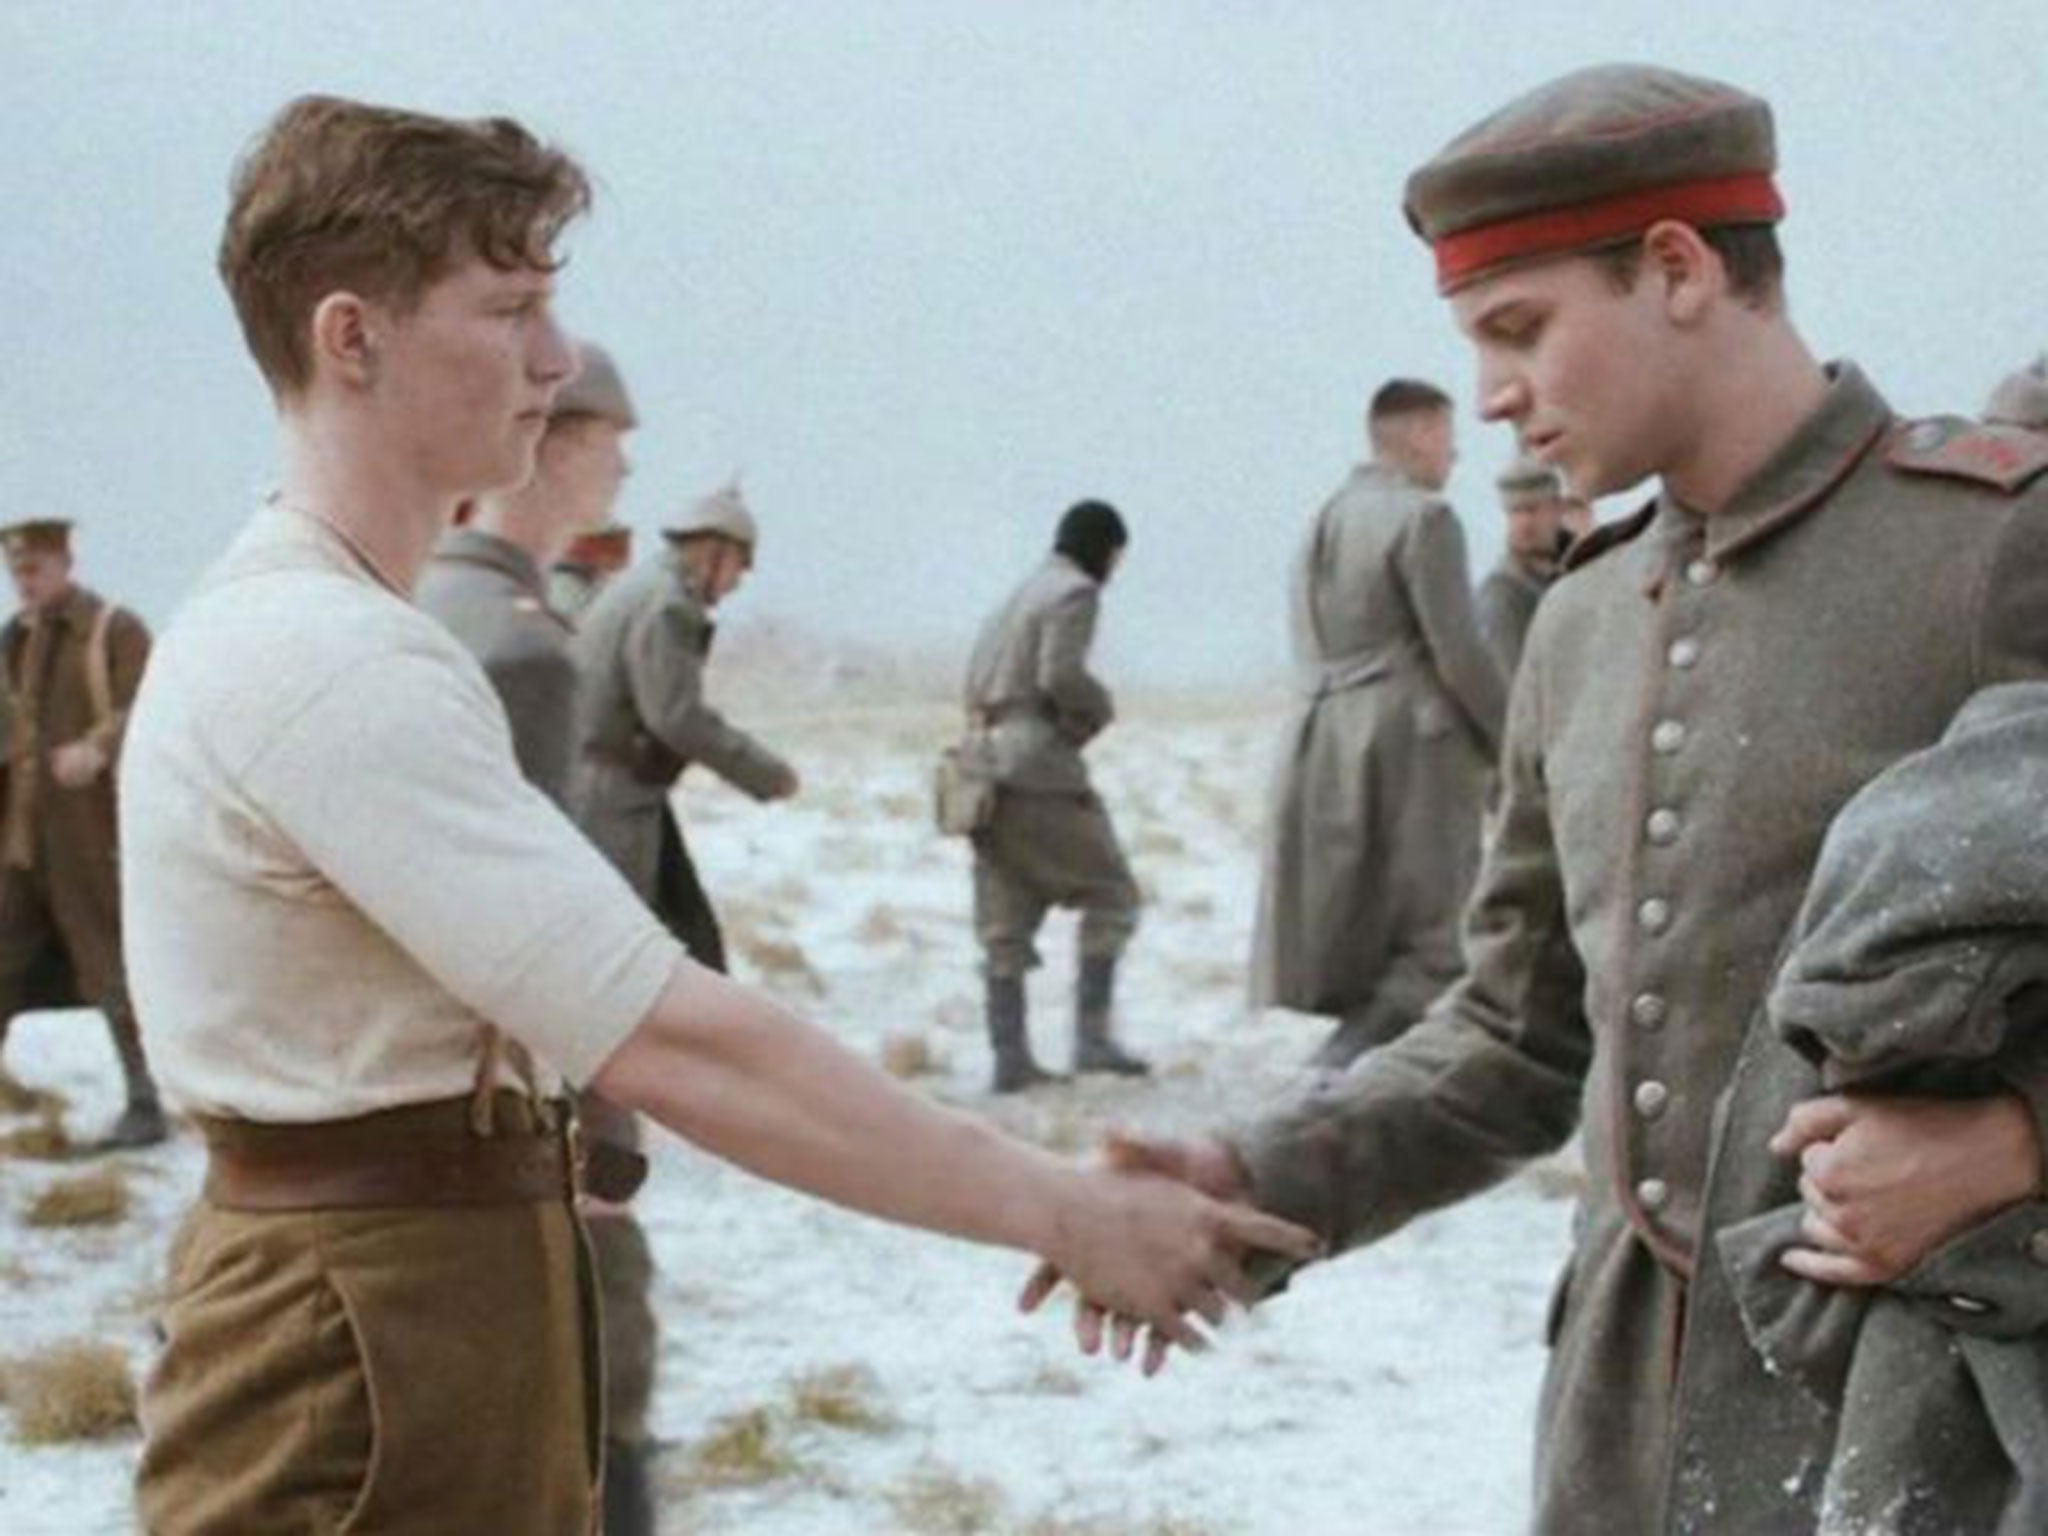 Sainsbury’s “WW1 truce” Christmas advert, which generated 700 viewer complaints